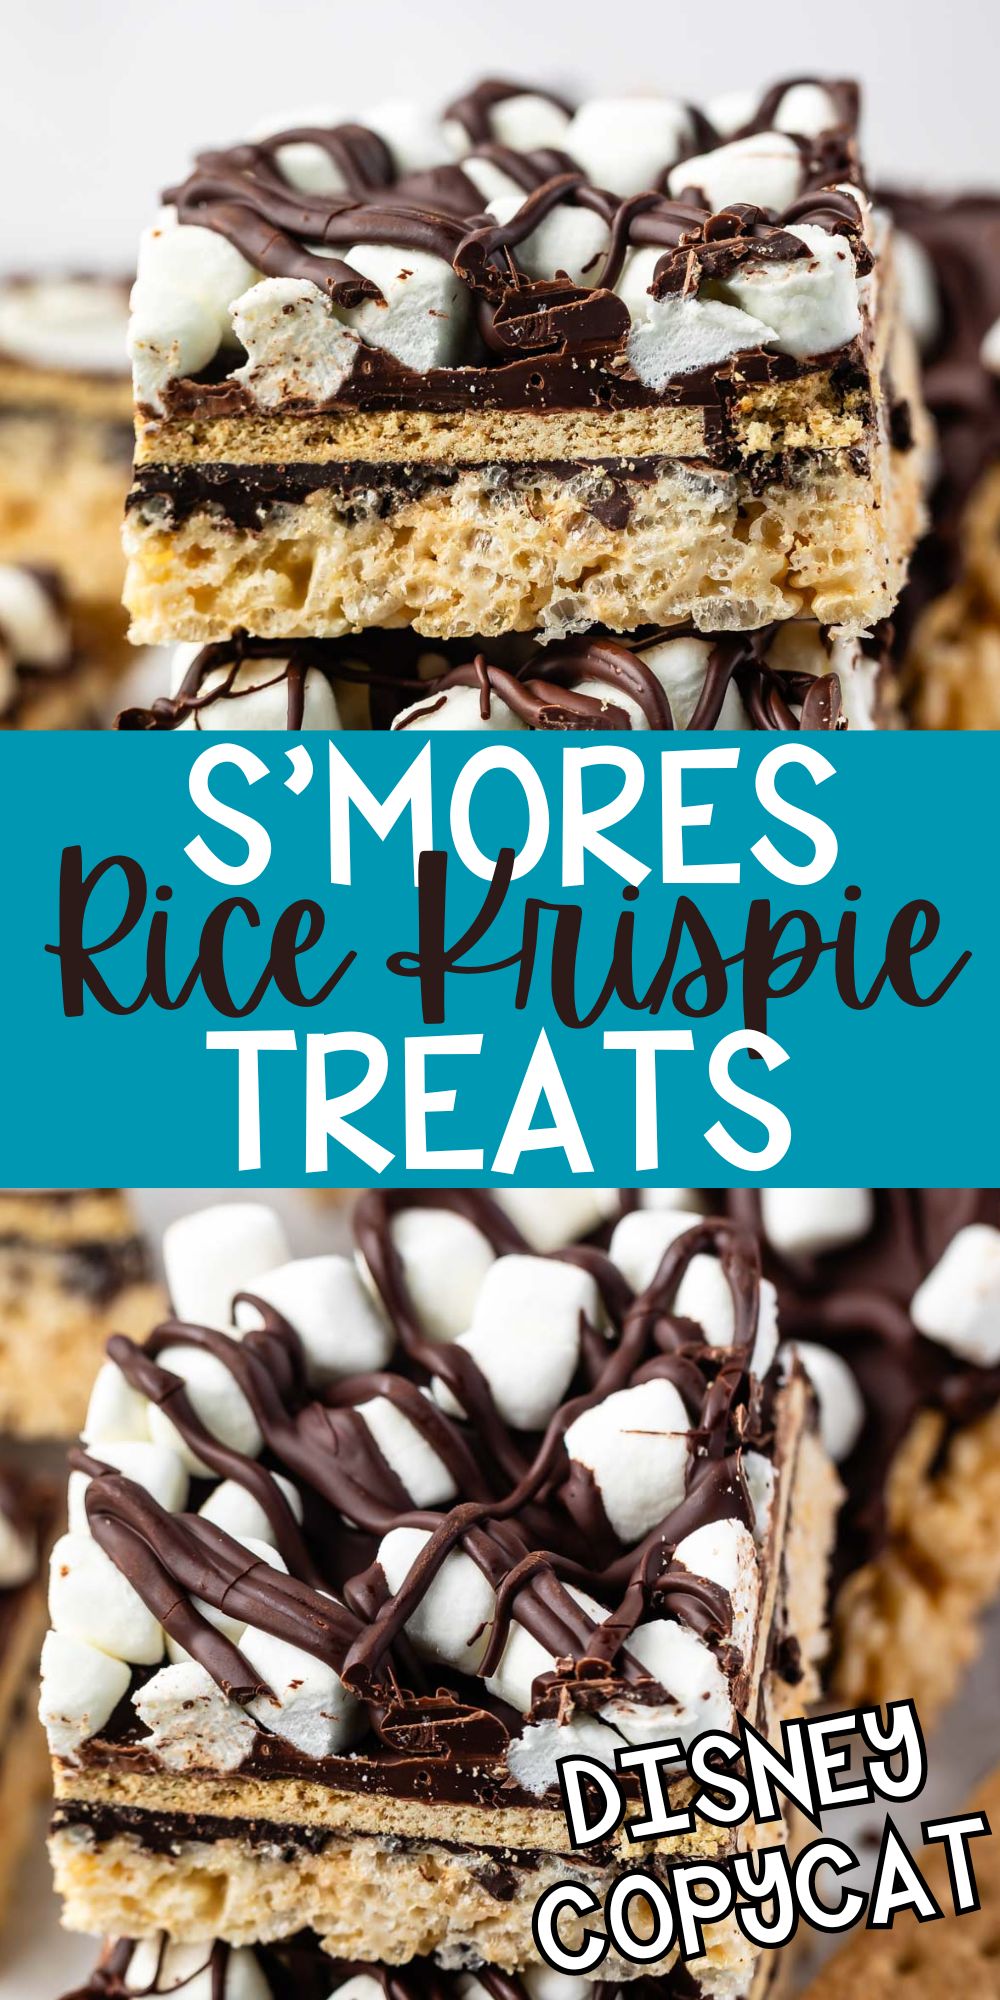 two photos of stacked Rice Krispie treats with marshmallows and chocolate on top with words on the image.